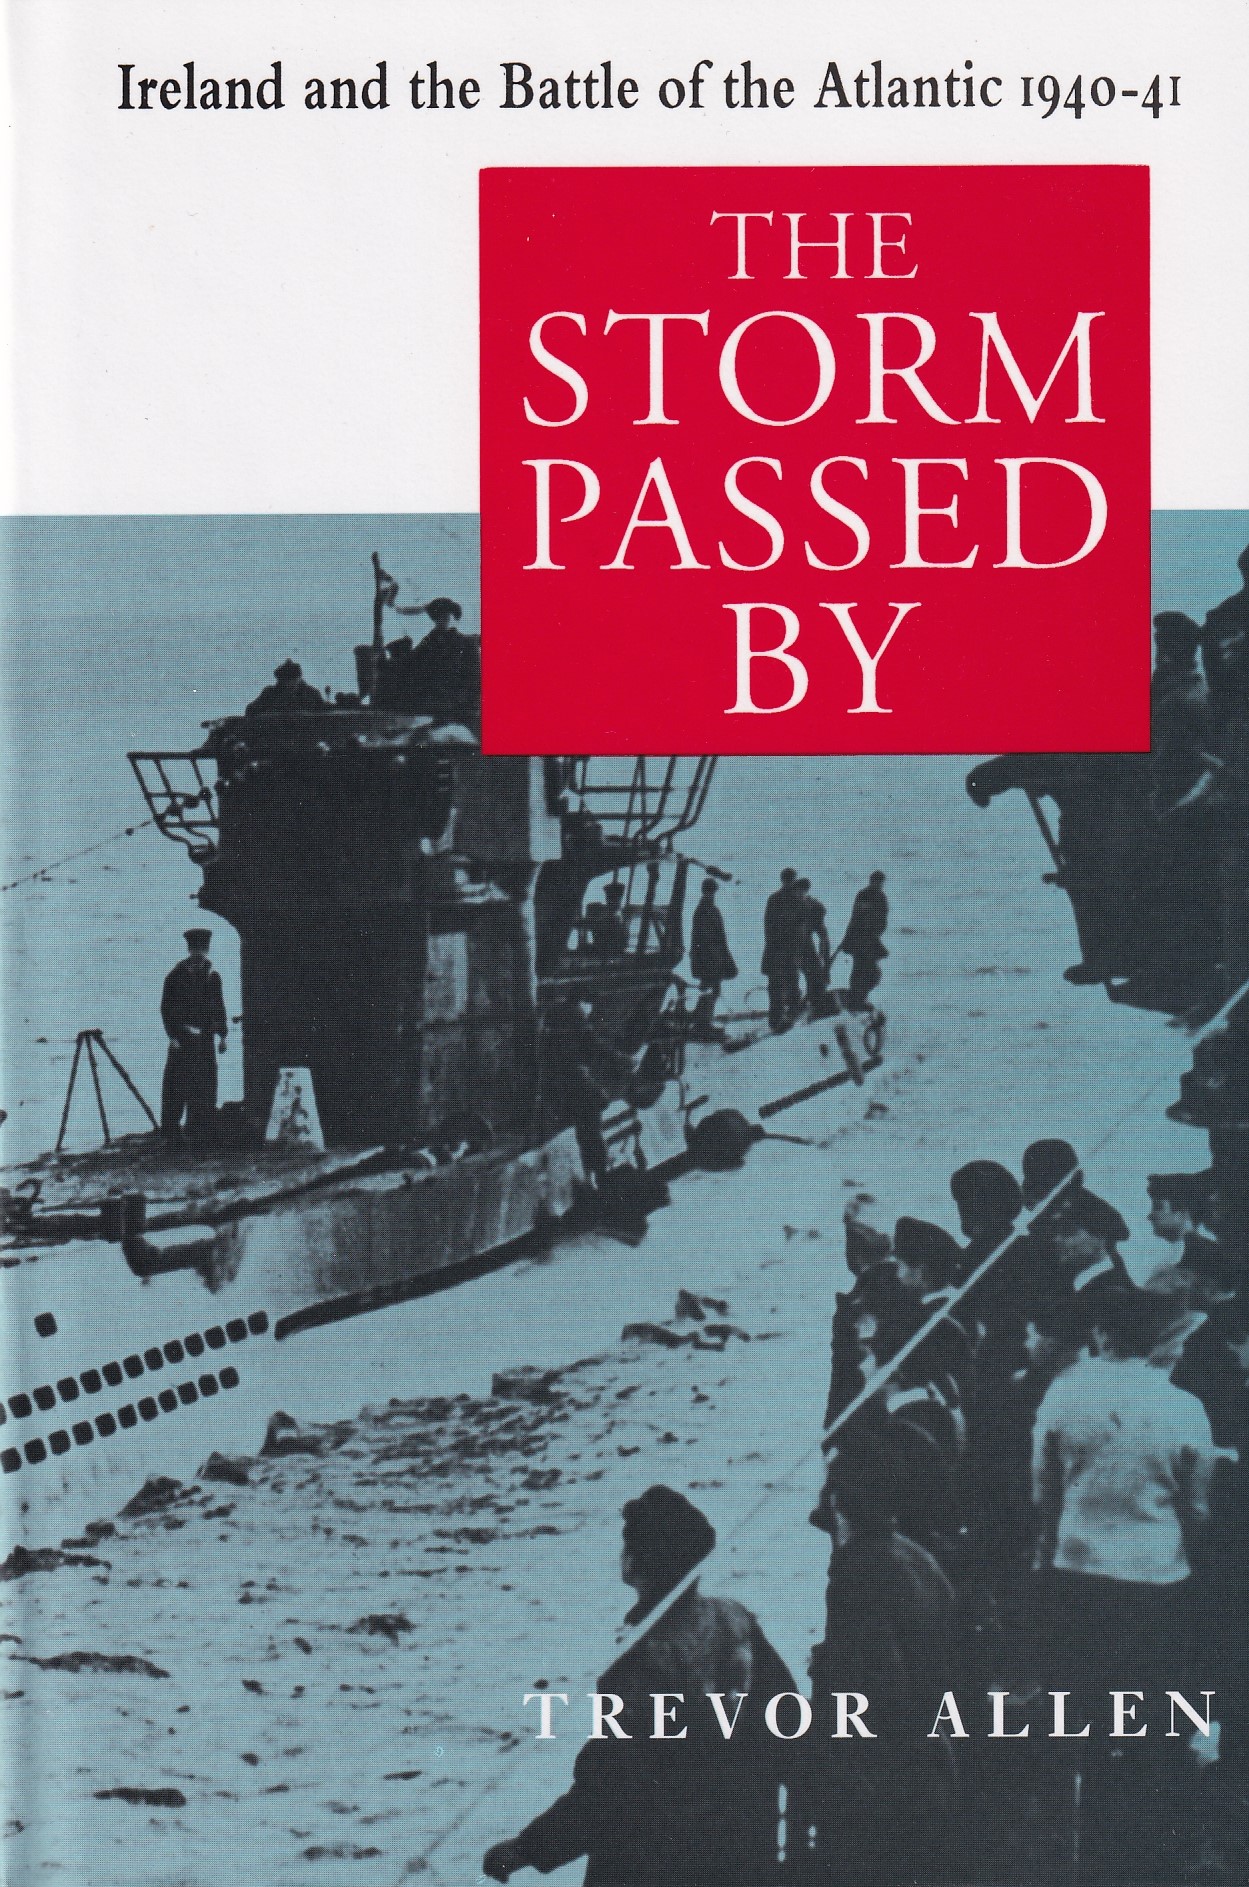 The Storm Passed By: Ireland and the Battle of the Atlantic, 1941-42 by Trevor Allen